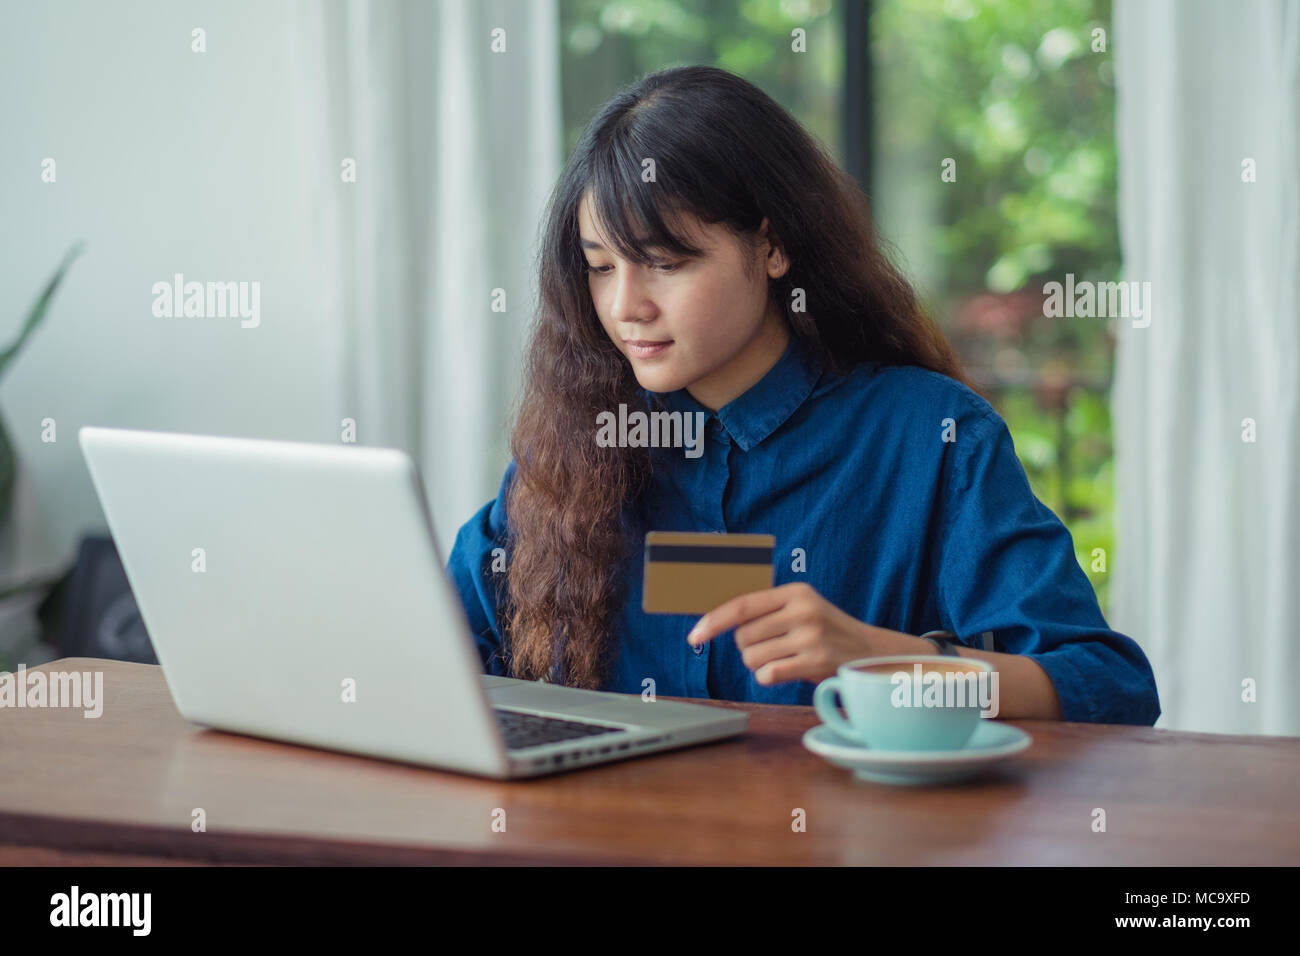 asian woman online shopping using credit card with laptop computer on wood table at cafe restaurant,Digital lifestyle concept Stock Photo